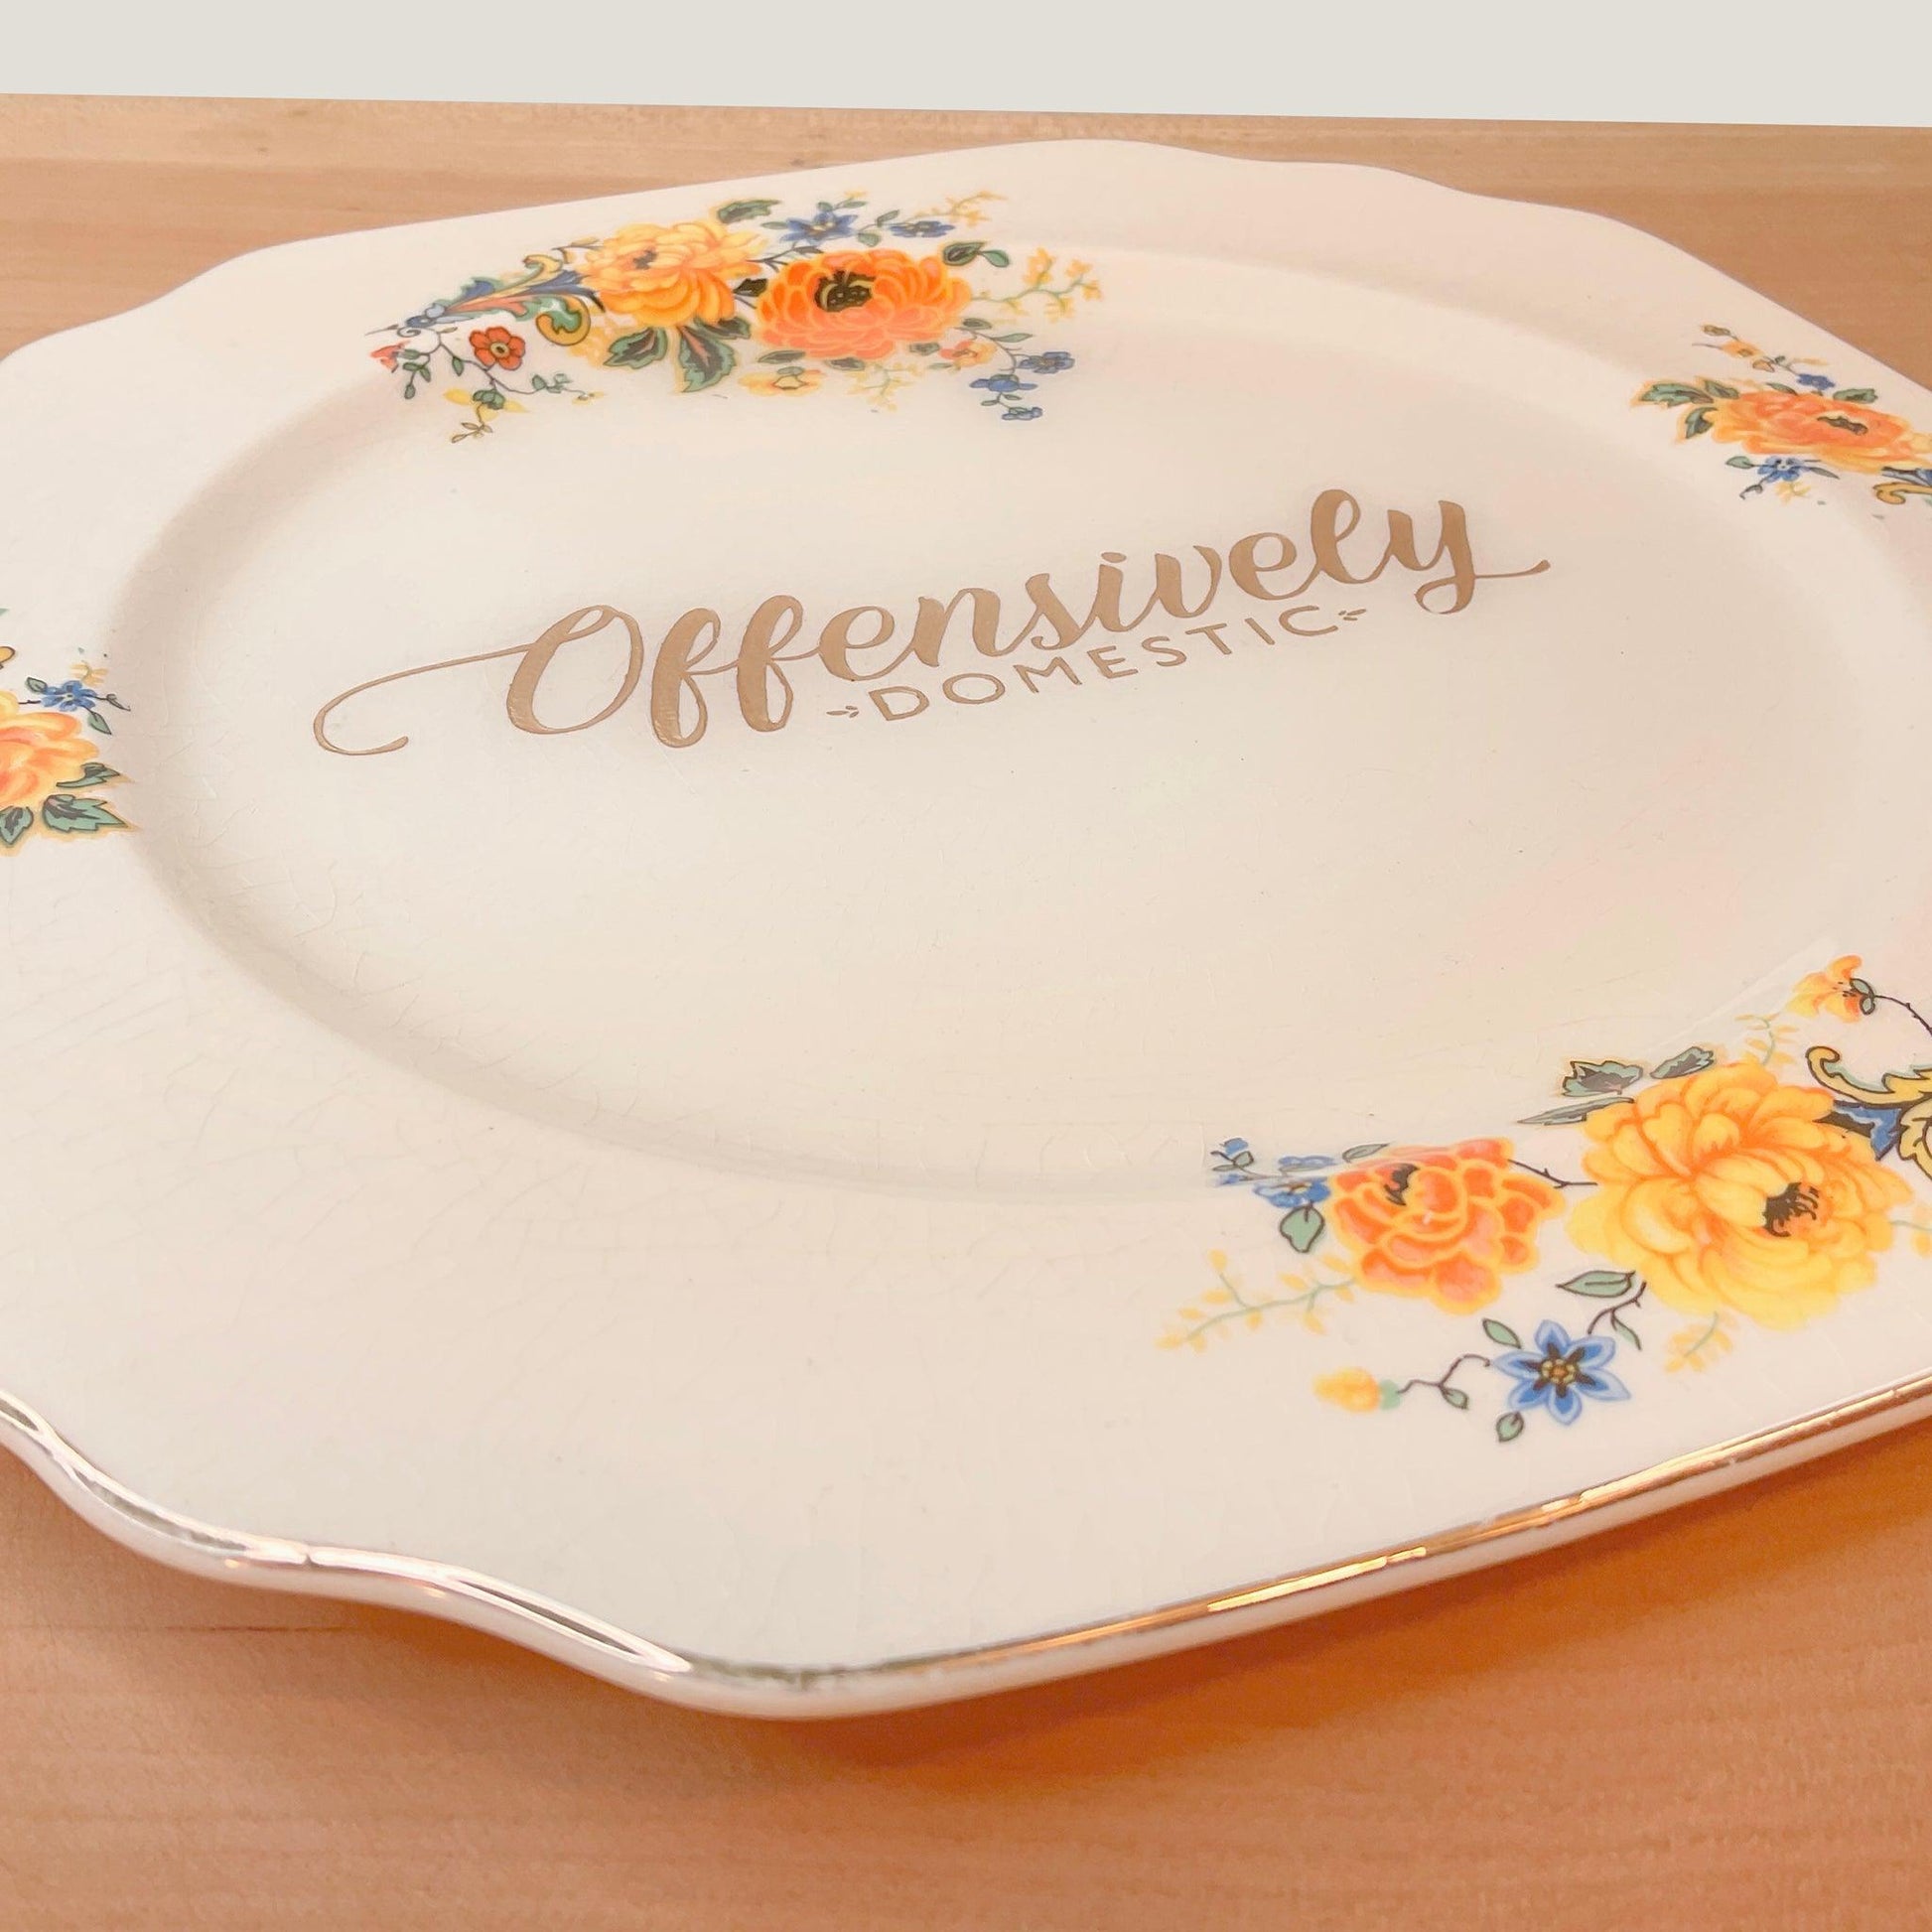 OD Dinner Plate - Offensively Domestic